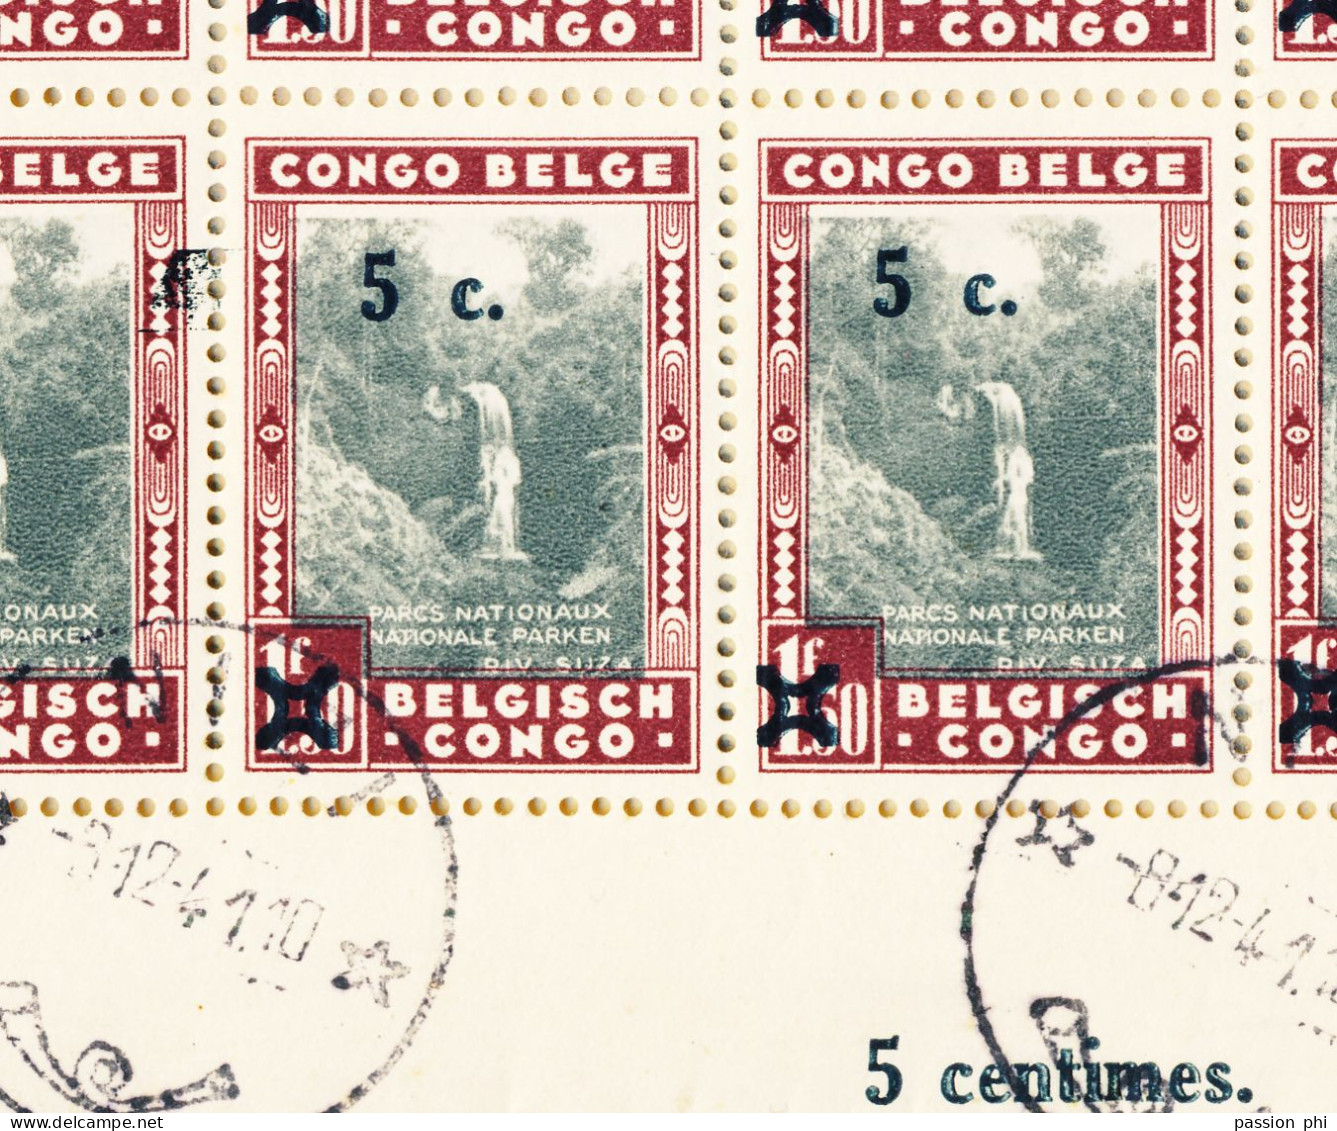 BELGIAN CONGO NATIONAL PARKS COB 226 COMPLETE SHEET USED (SHEET MARGINS MISSING) GUTTER AND VARIETY SMALL LAKE - Oblitérés